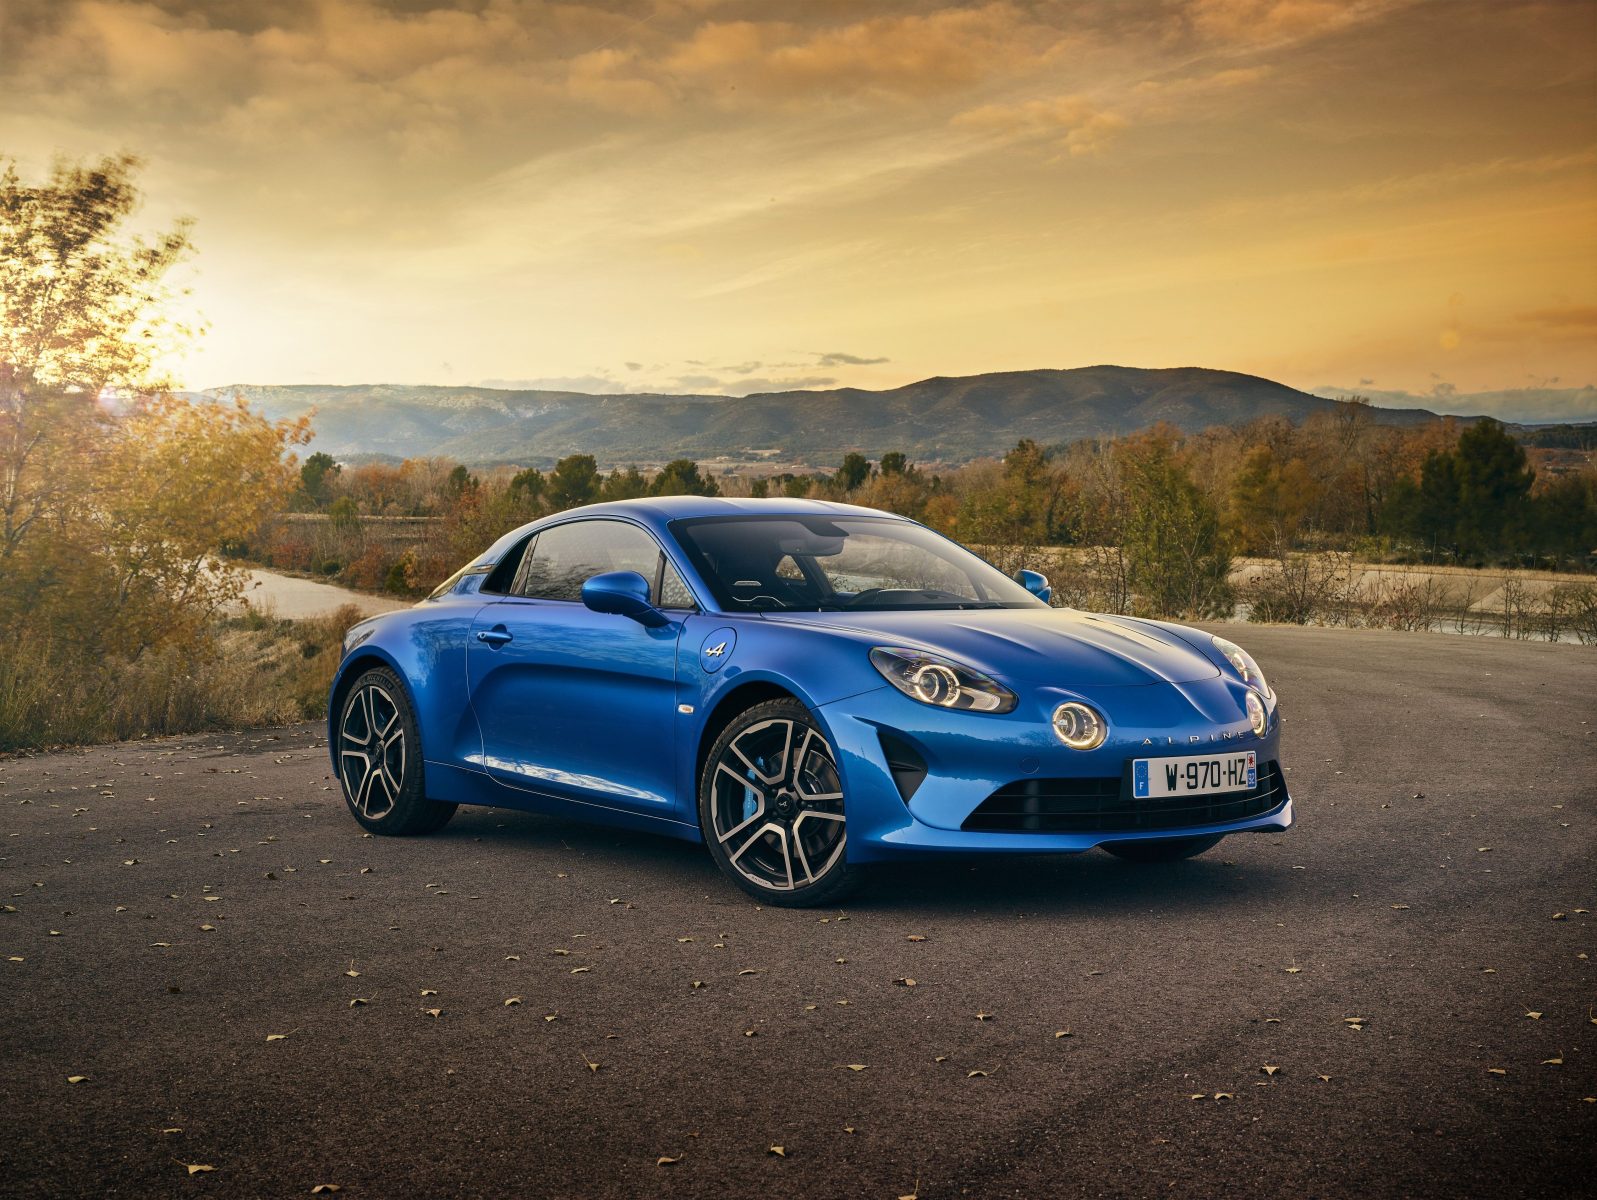 Alpine A110 in Blue with scenic backdrop